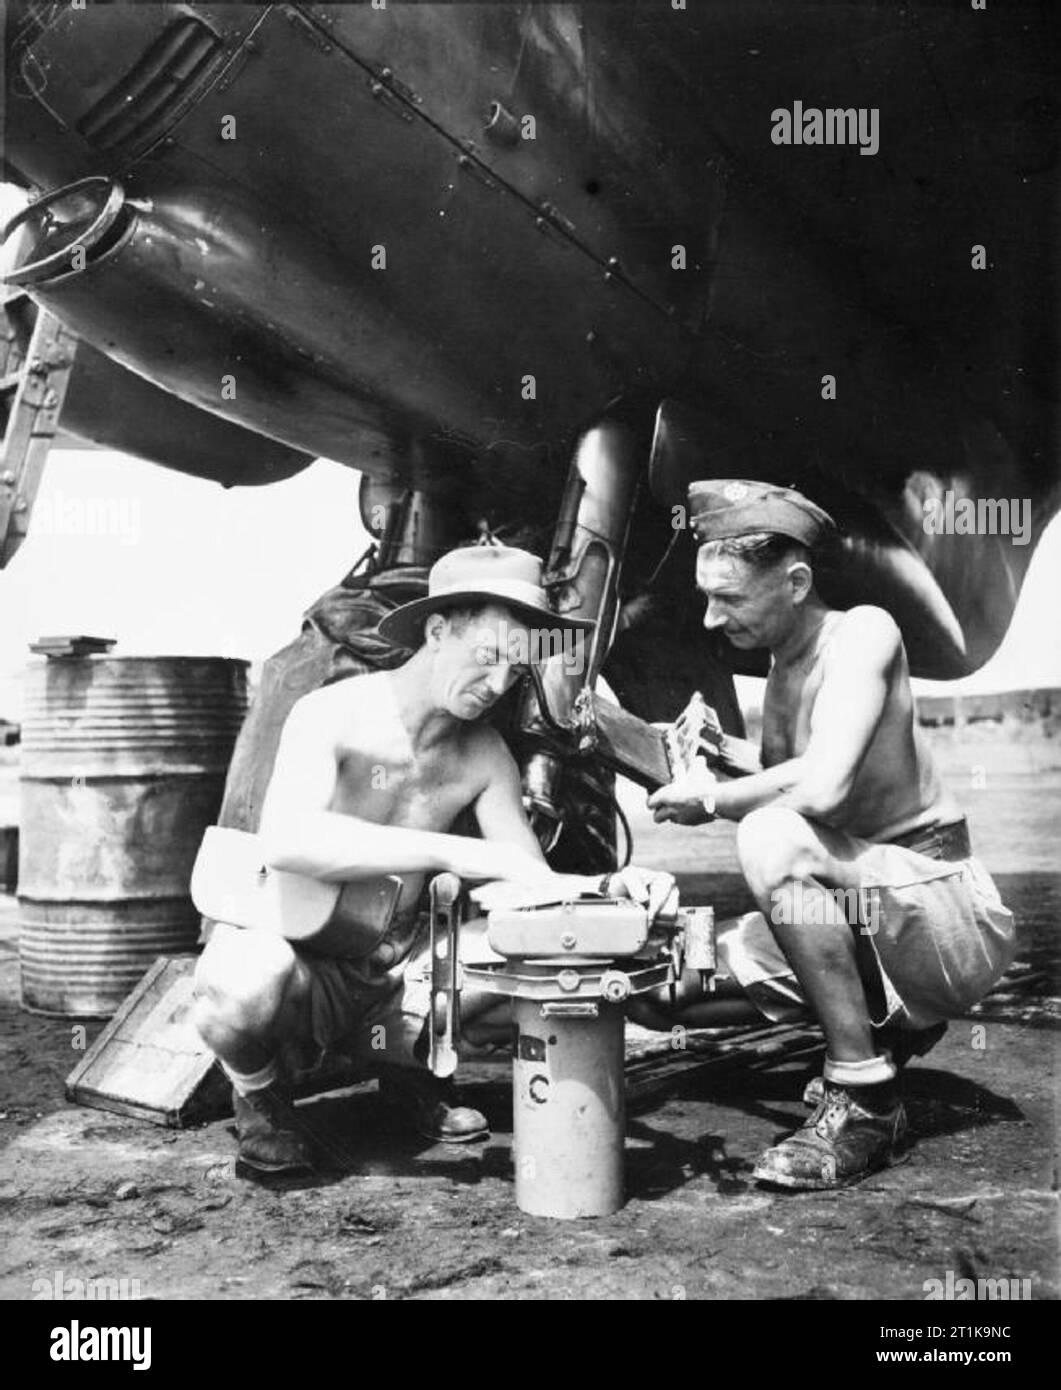 Royal Air Force Operations in the Far East, 1941-1945. Aircraftman I. Harris of Gorton, Manchester and Leading Aircraftman I. Harris of Leeds cleaning the register glass of a Type F.24 aerial camera before installing it in a De Havilland Mosquito photo-reconnaissance aircraft of No. 684 Squadron RAF at Alipore, India. Stock Photo